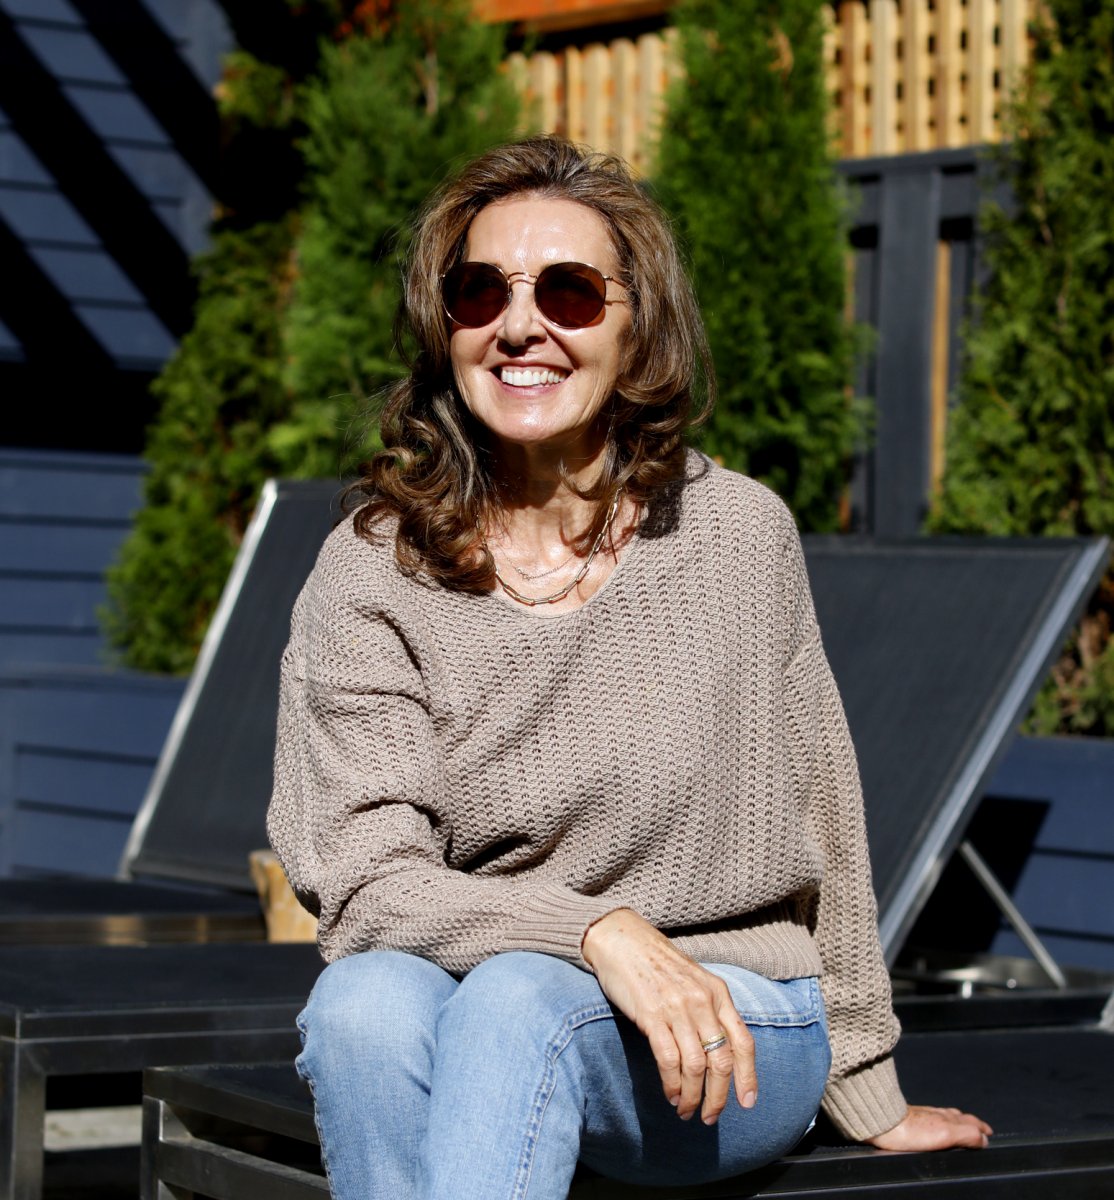 Pivot Skincare founder Cindy Berg sits on a lawn chair and smiles in the sun.